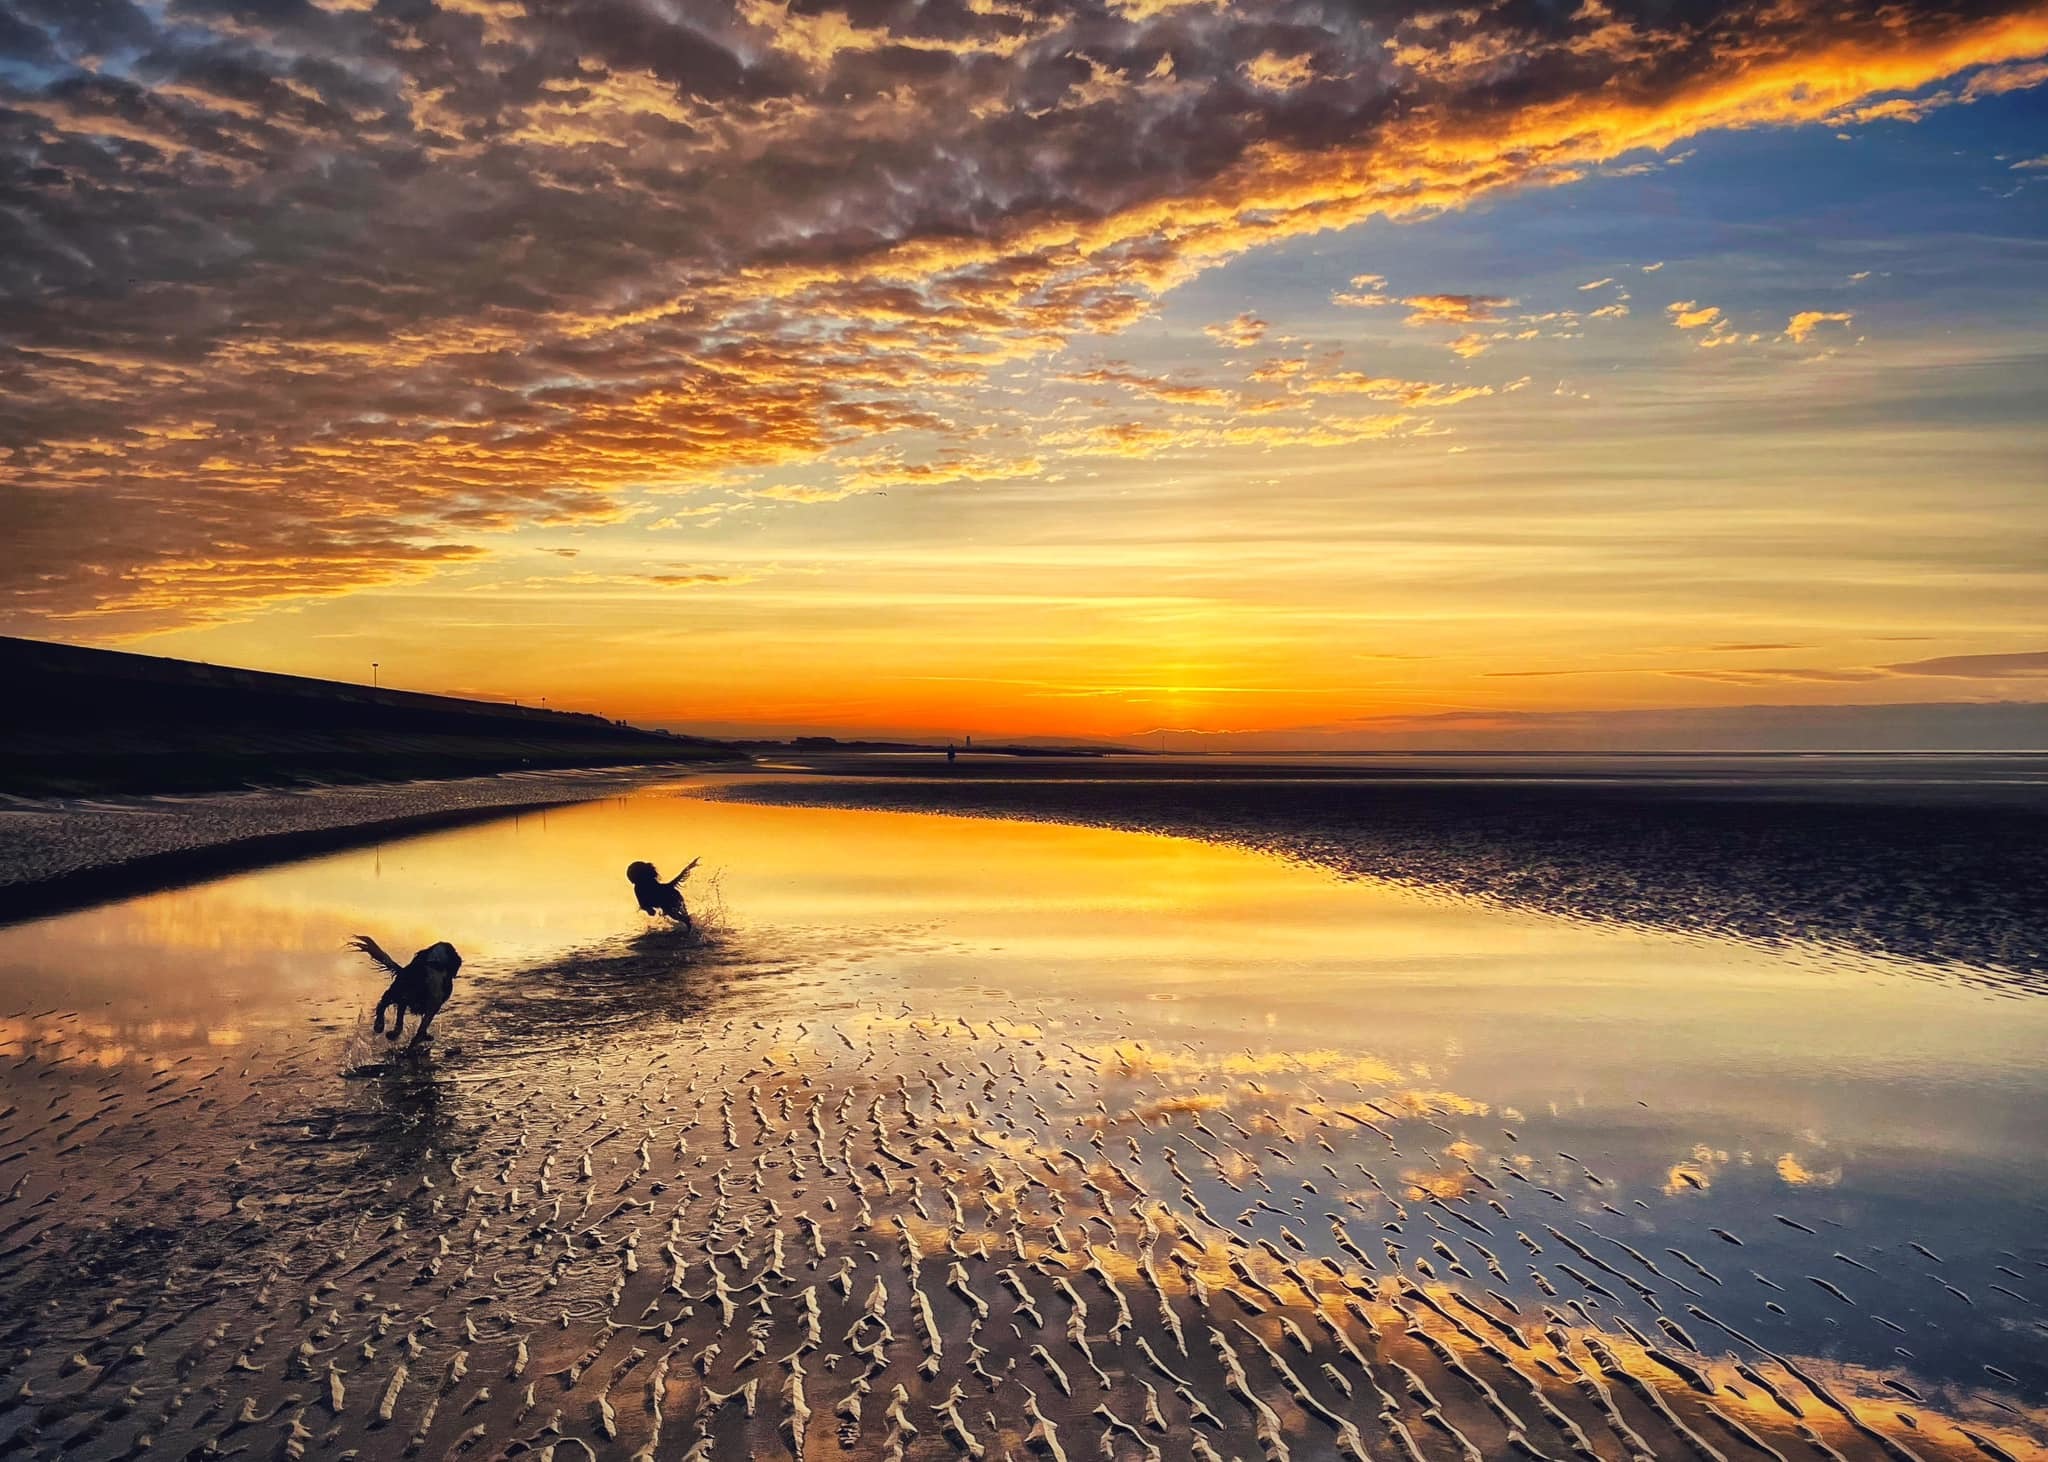 A perfect sunset at Wallasey beach by Heather Gars